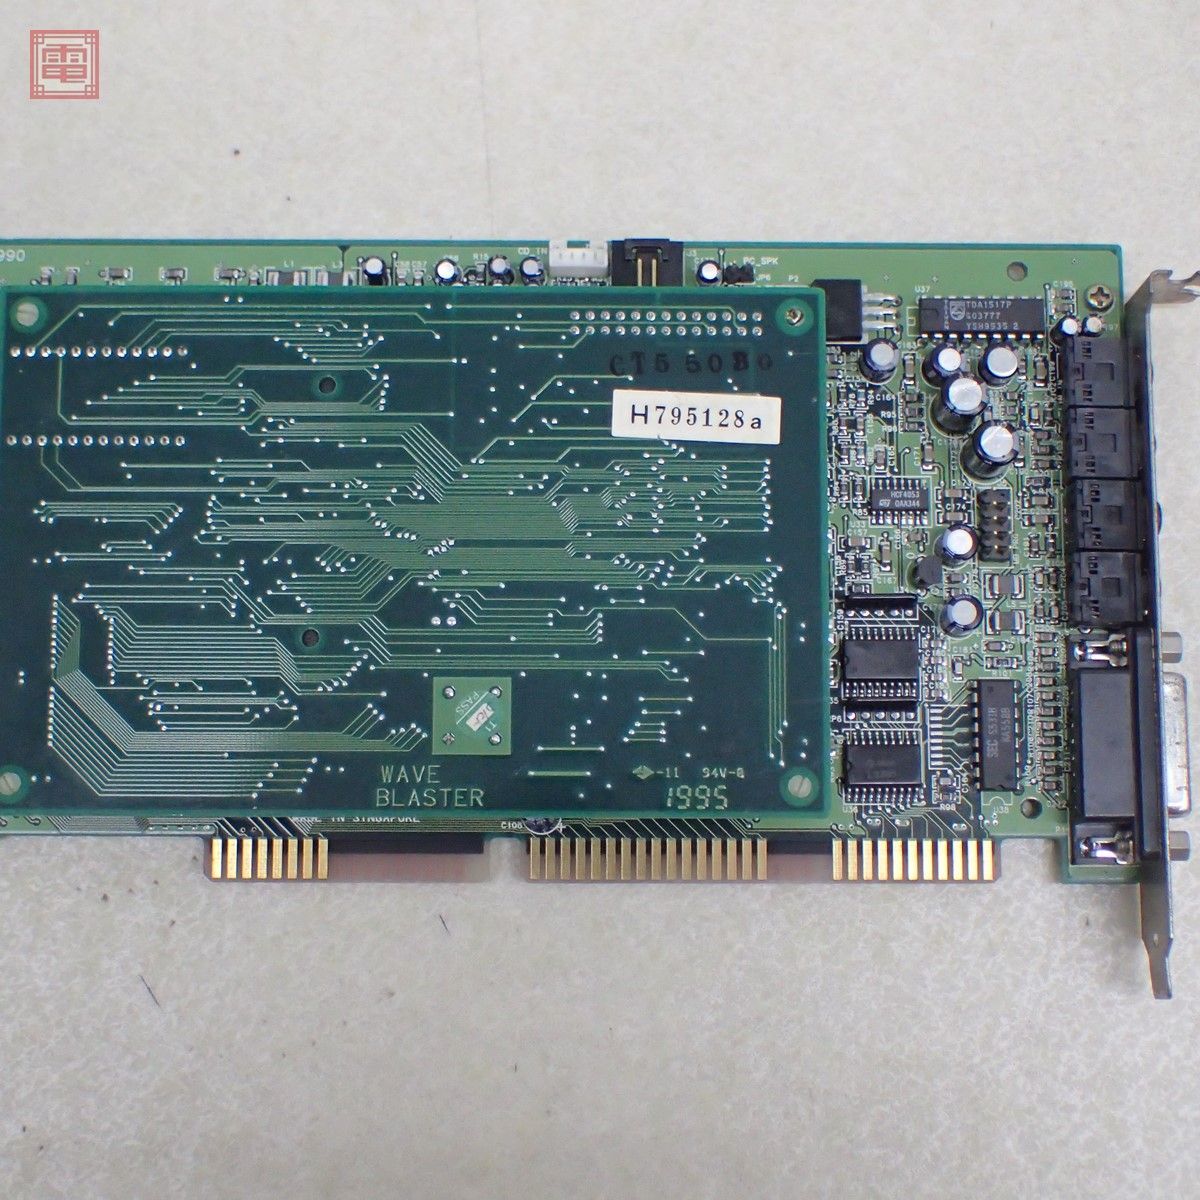 Creative Labs Sound Blaster AWE32 PnP(CT3990)ISA bus for sound board *Wave BLASTER II(CT1910)MIDI sound source do- turbo -do operation not yet verification [20